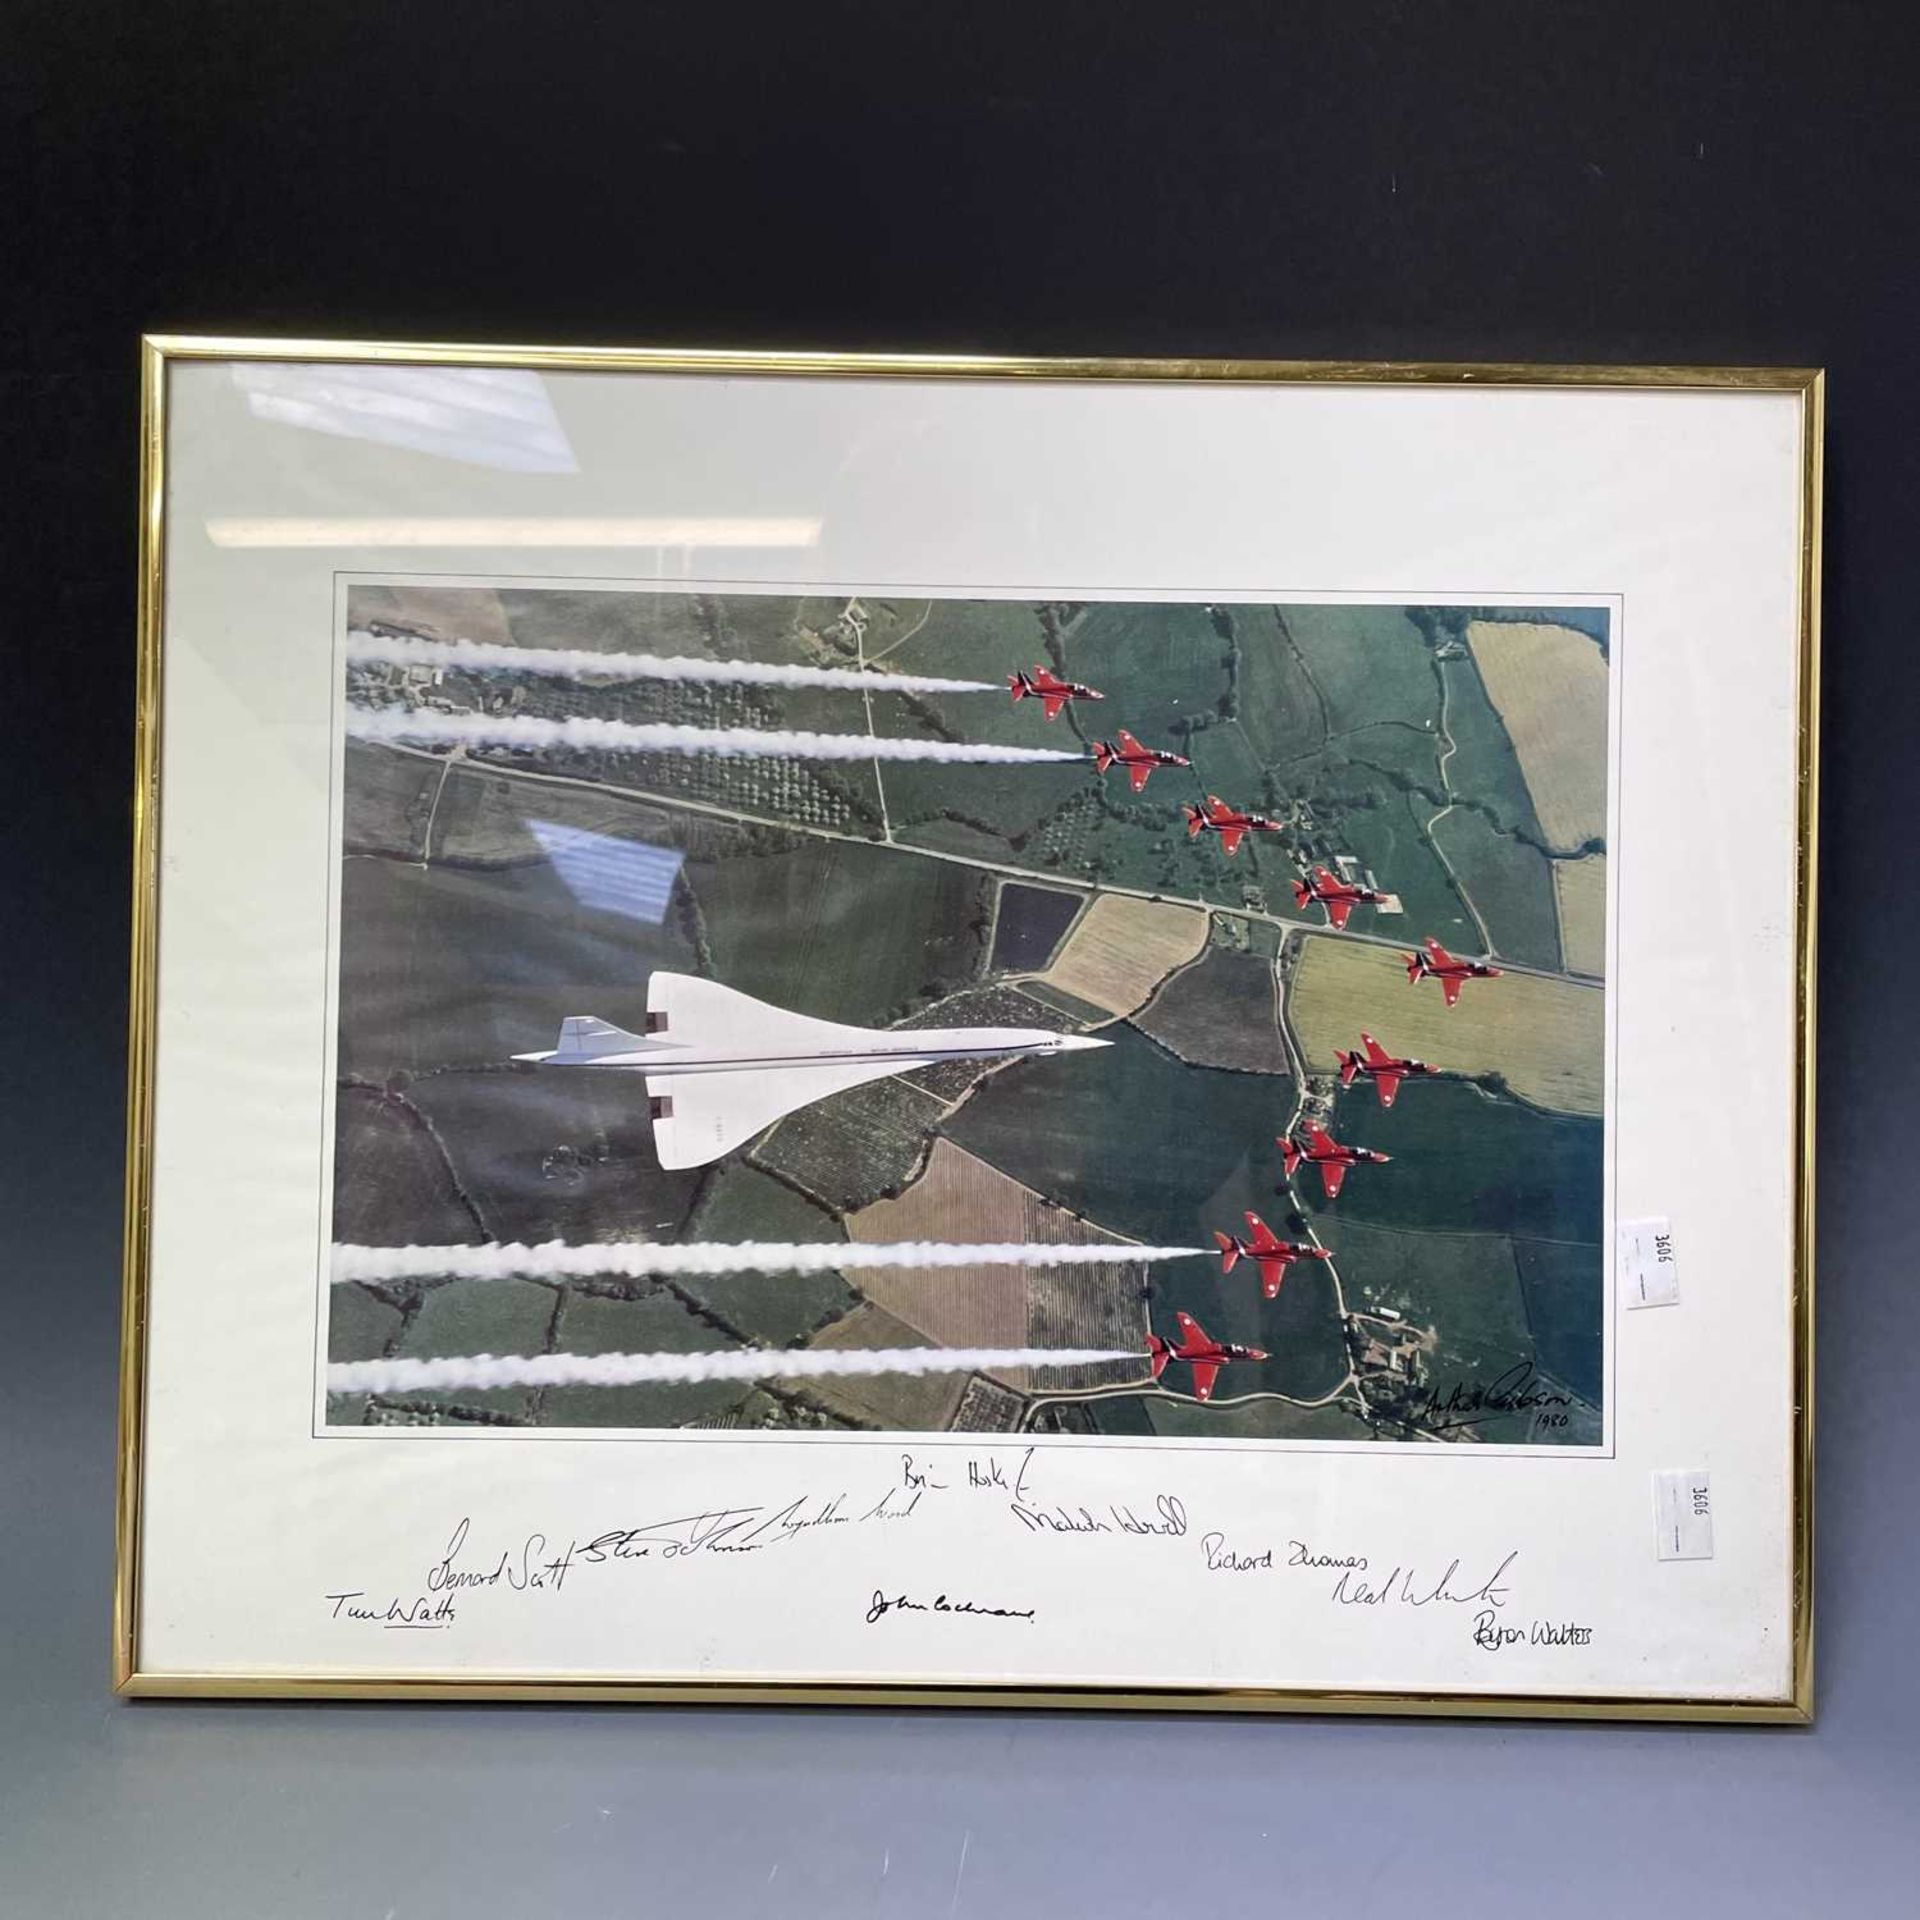 Transport Aviation - Concorde / Red Arrows, etc Interest. Lot comprises two 20" x 16" framed and - Image 2 of 7